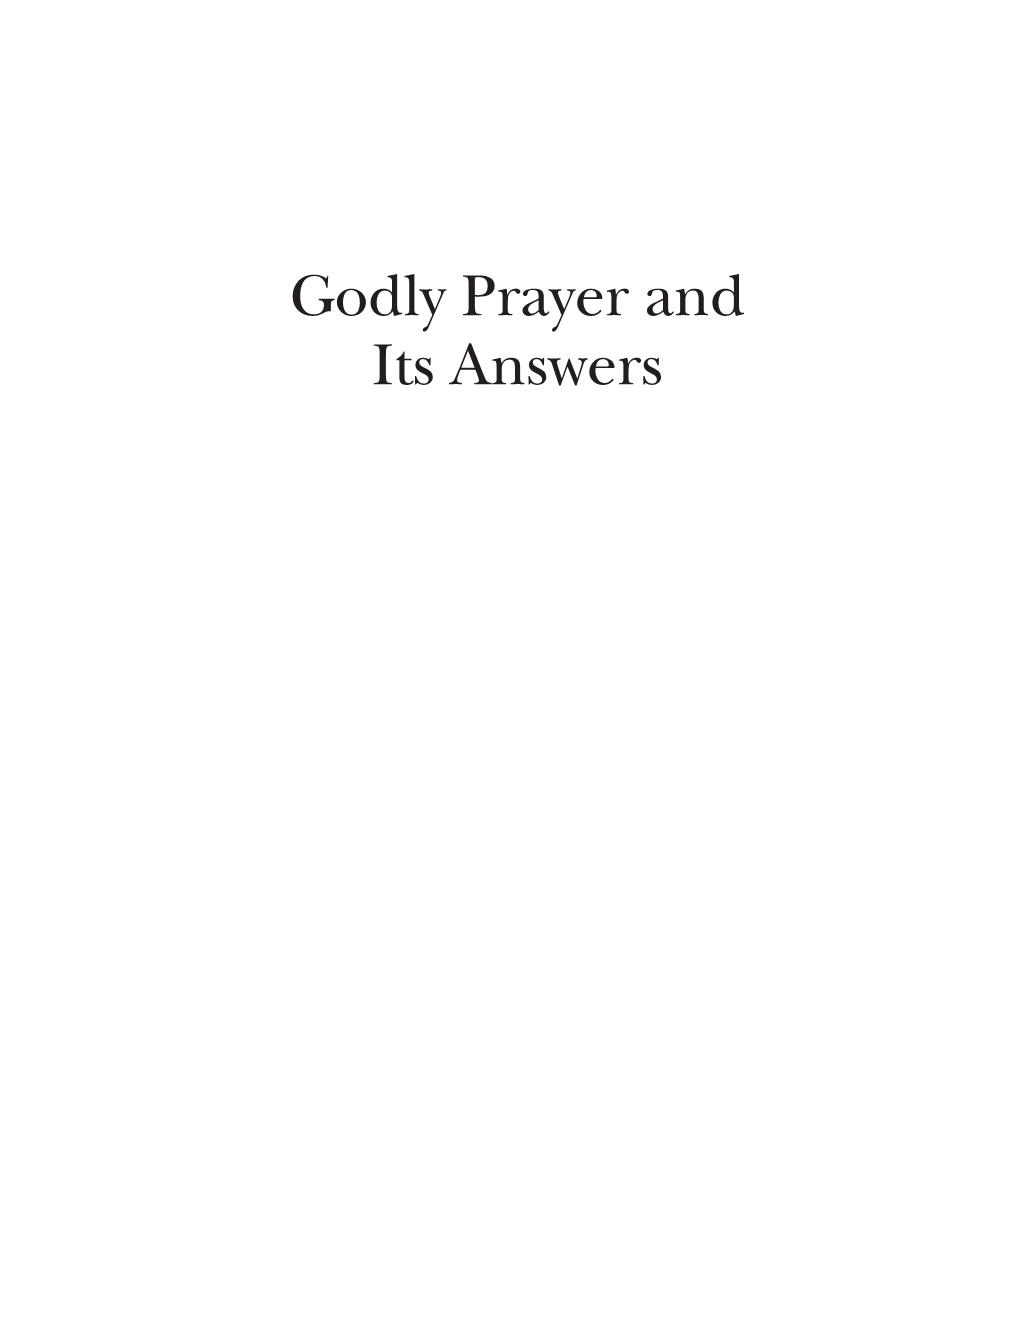 Godly Prayer and Its Answers